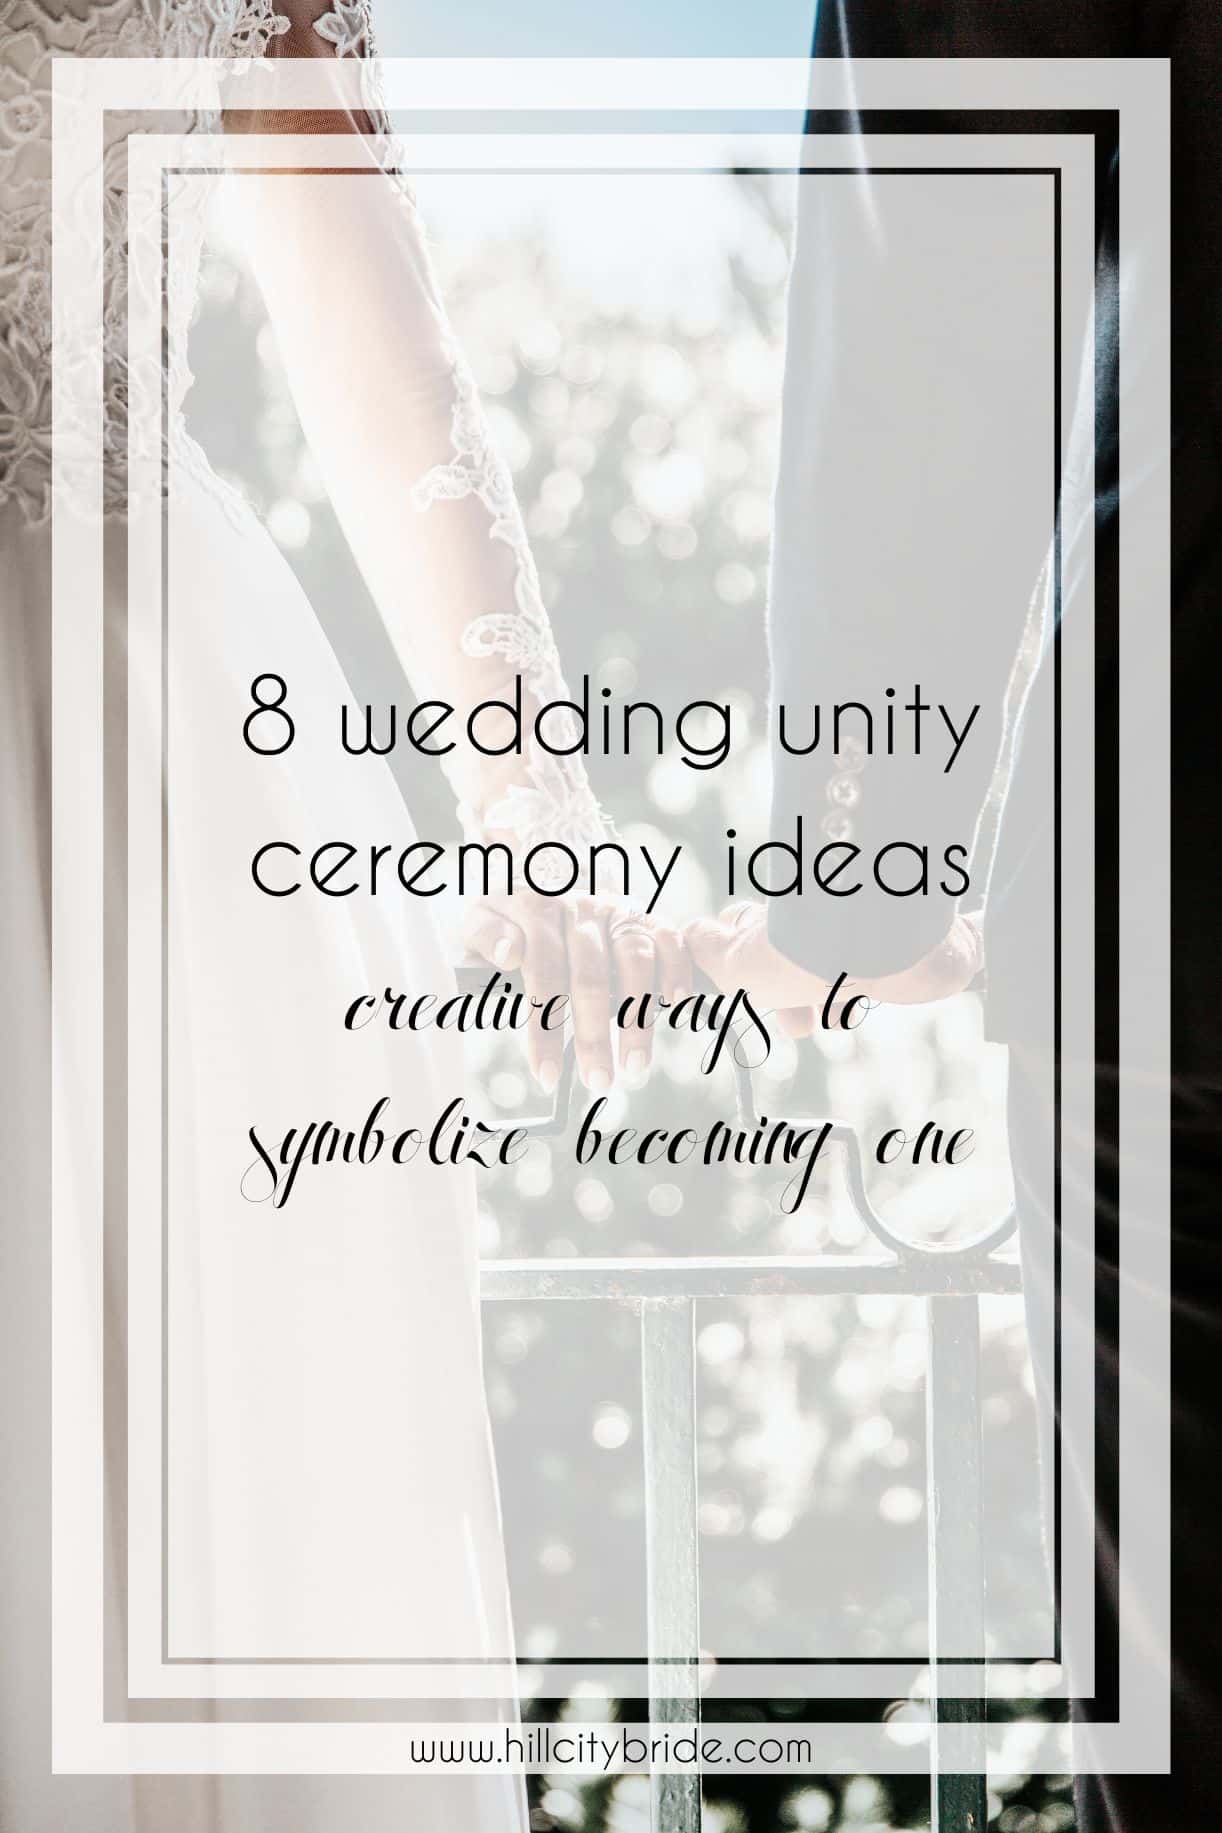 8 Wedding Unity Ceremony Ideas to Make Your Big Day Special